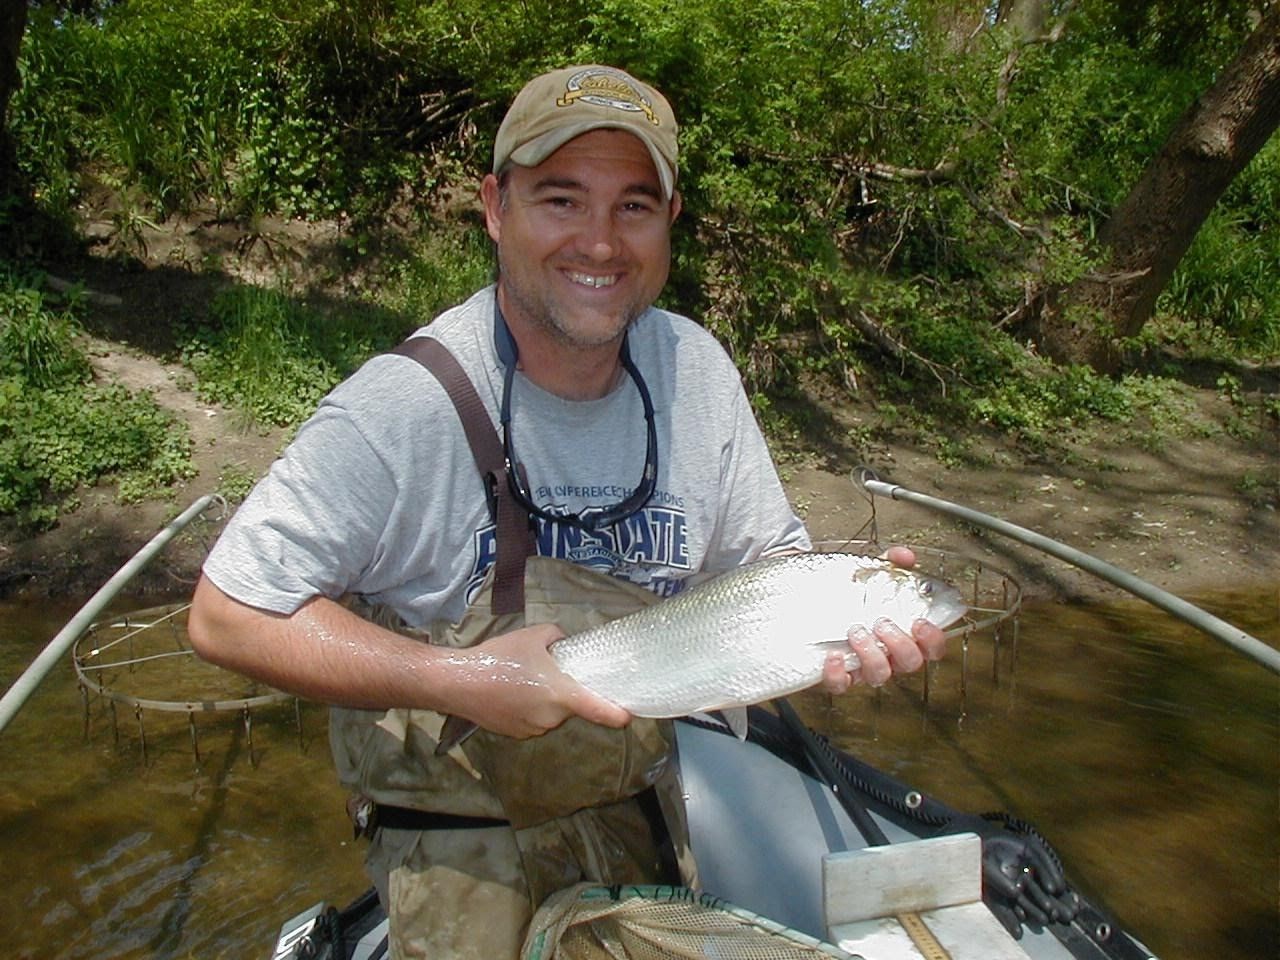 Matt Fisher, a fisheries biologist, catches a hickory shad in White Clay Creek. 2015 marked the first year that shad swam up White Clay Creek since 1777. Photo Credit: Jerry Kaufman.